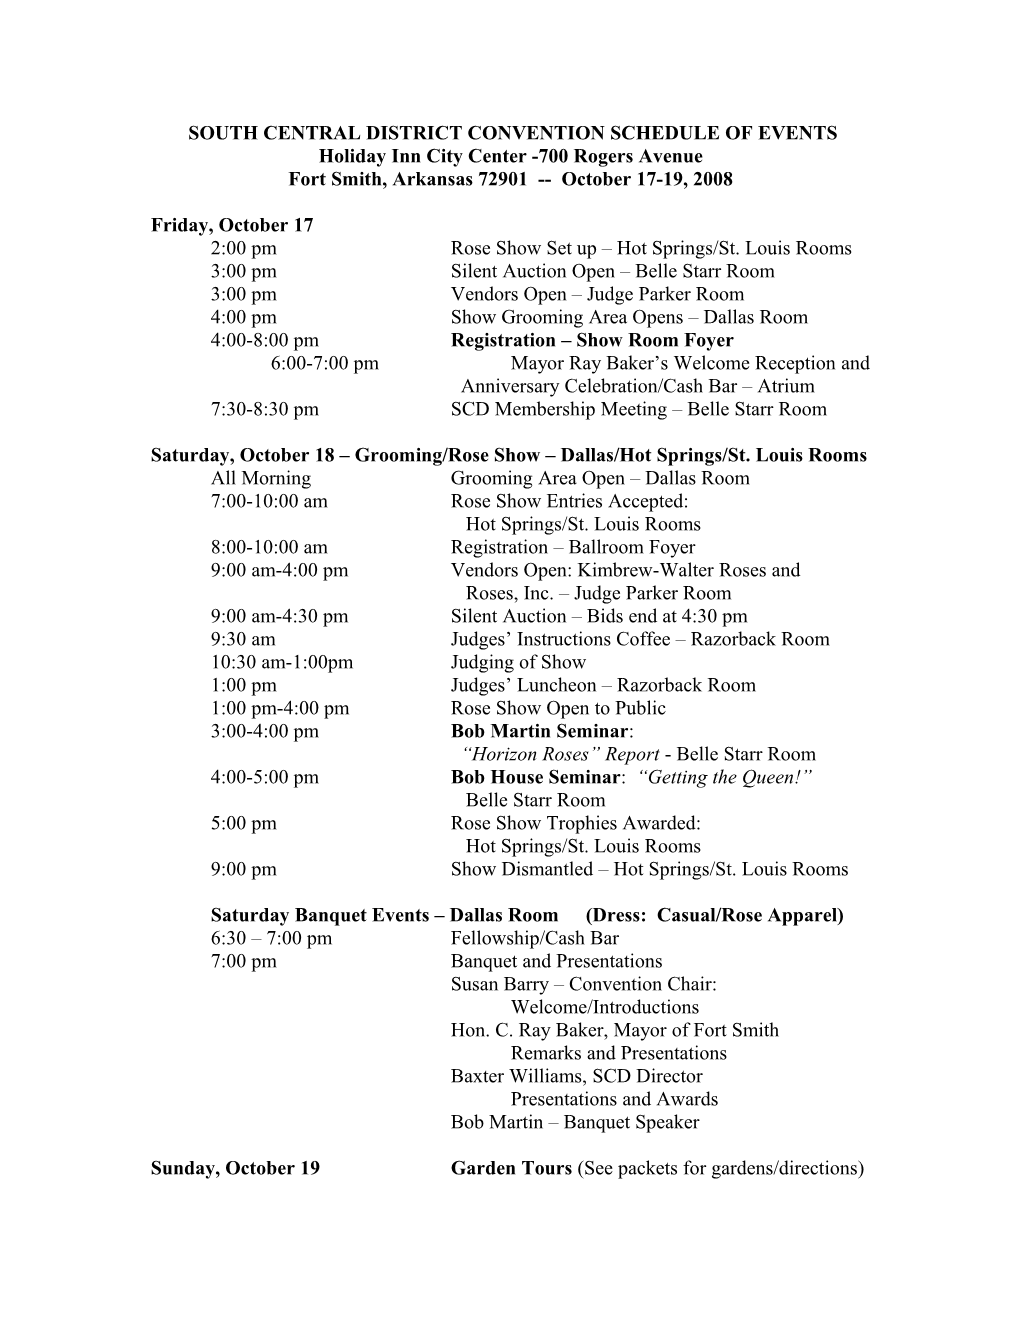 08 Scd Convention Schedule of Events